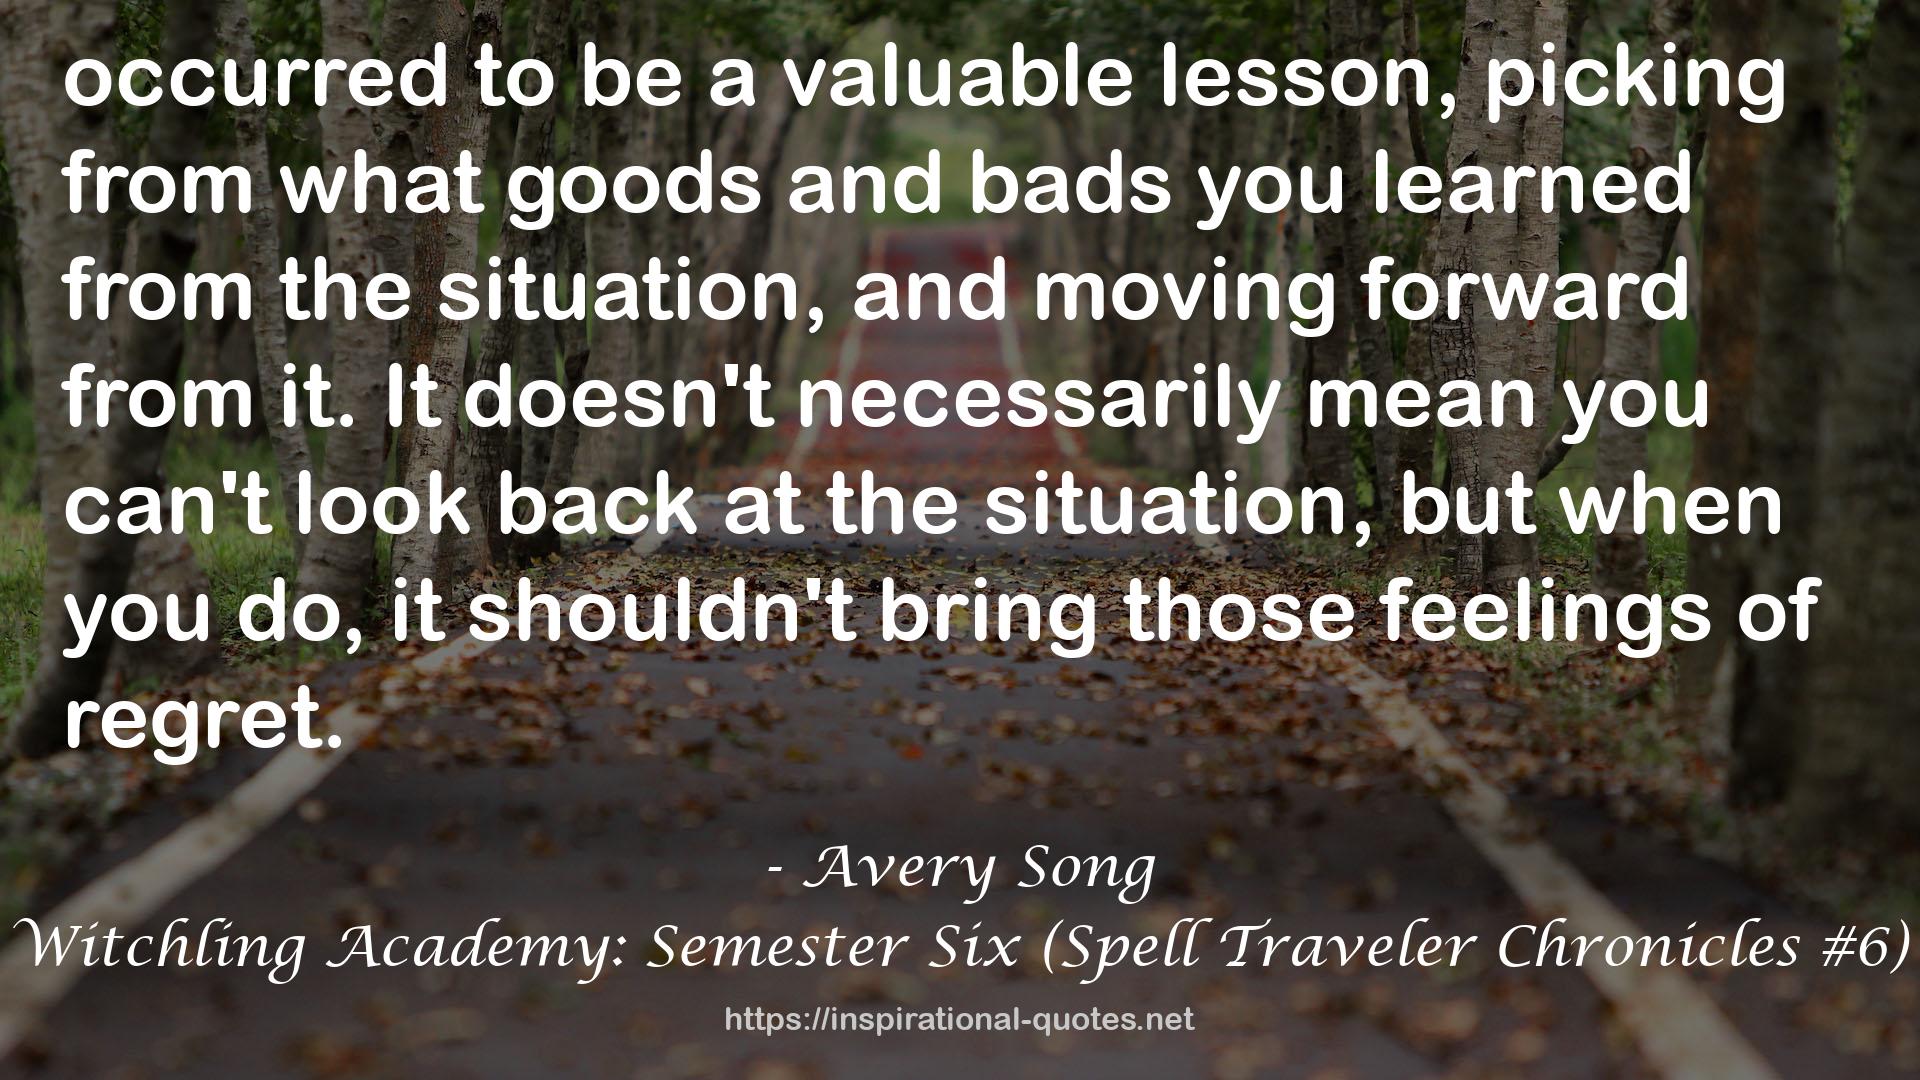 Witchling Academy: Semester Six (Spell Traveler Chronicles #6) QUOTES